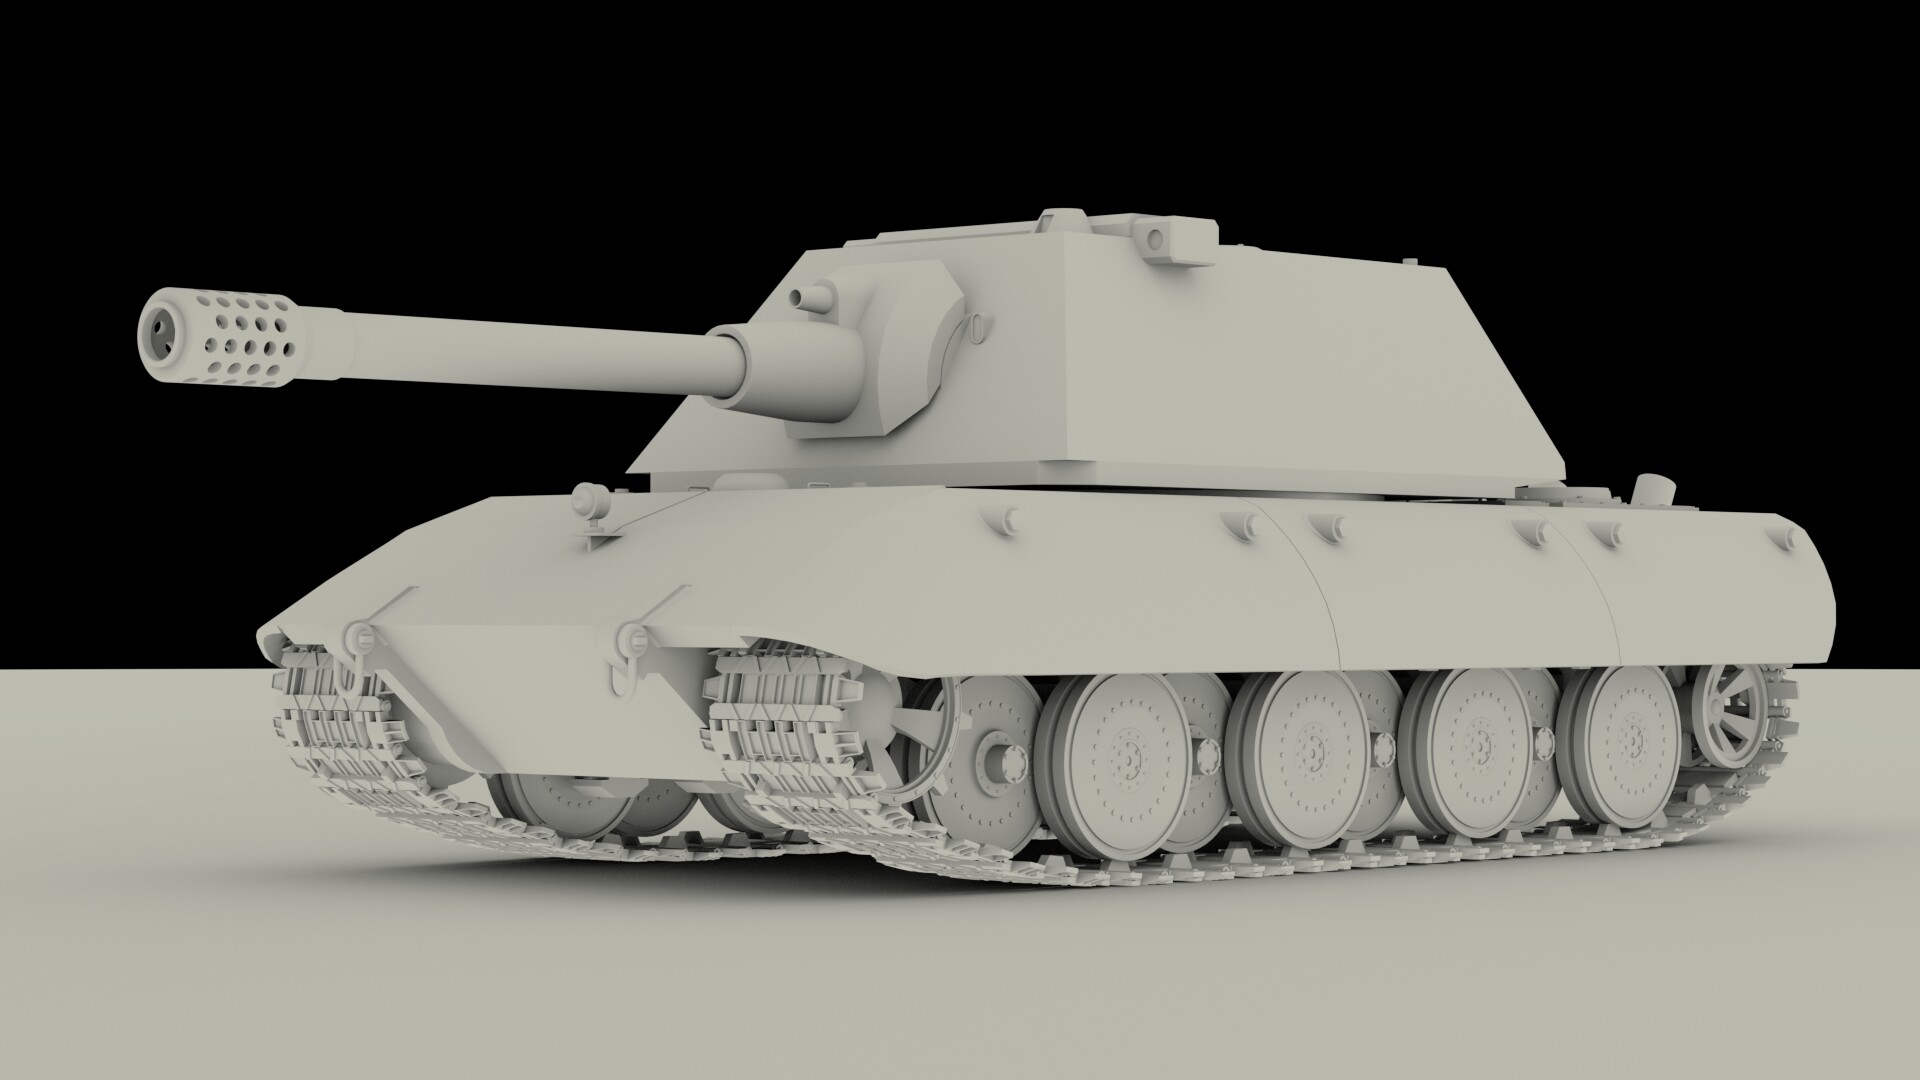 E 100 Superheavy Tank - Finished Projects - Blender Artists Community